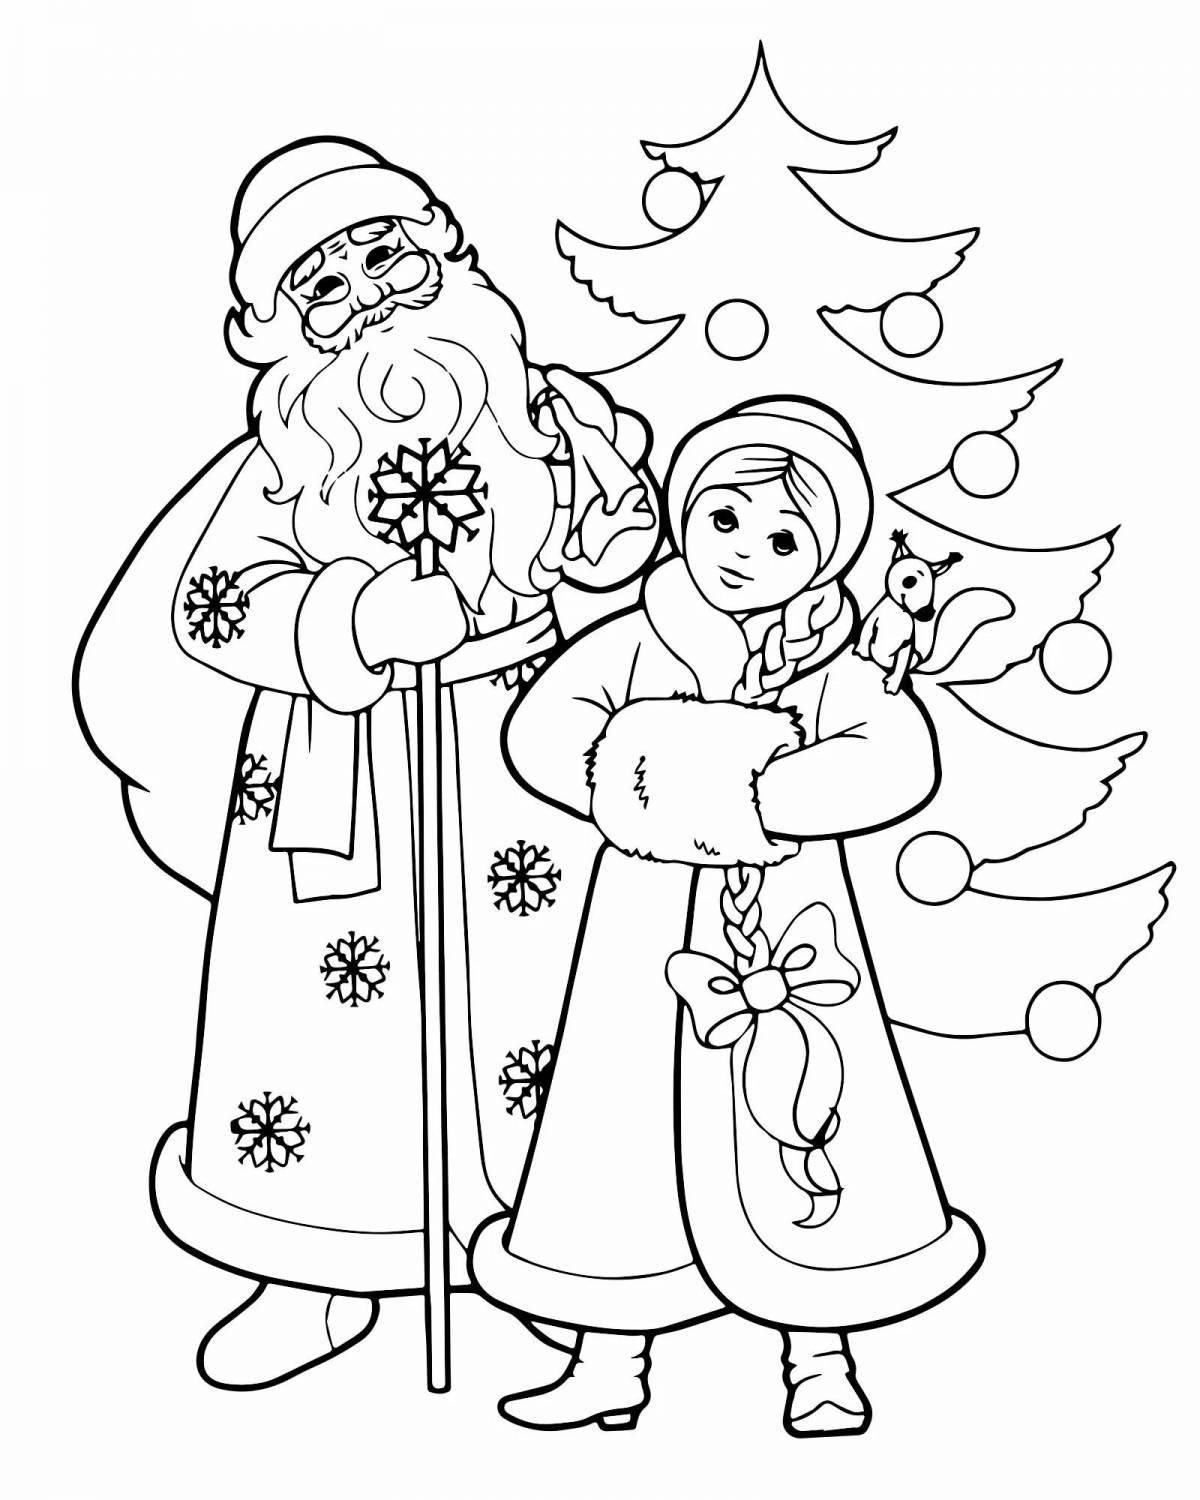 Santa Claus and Snow Maiden for children 3 4 years old #4